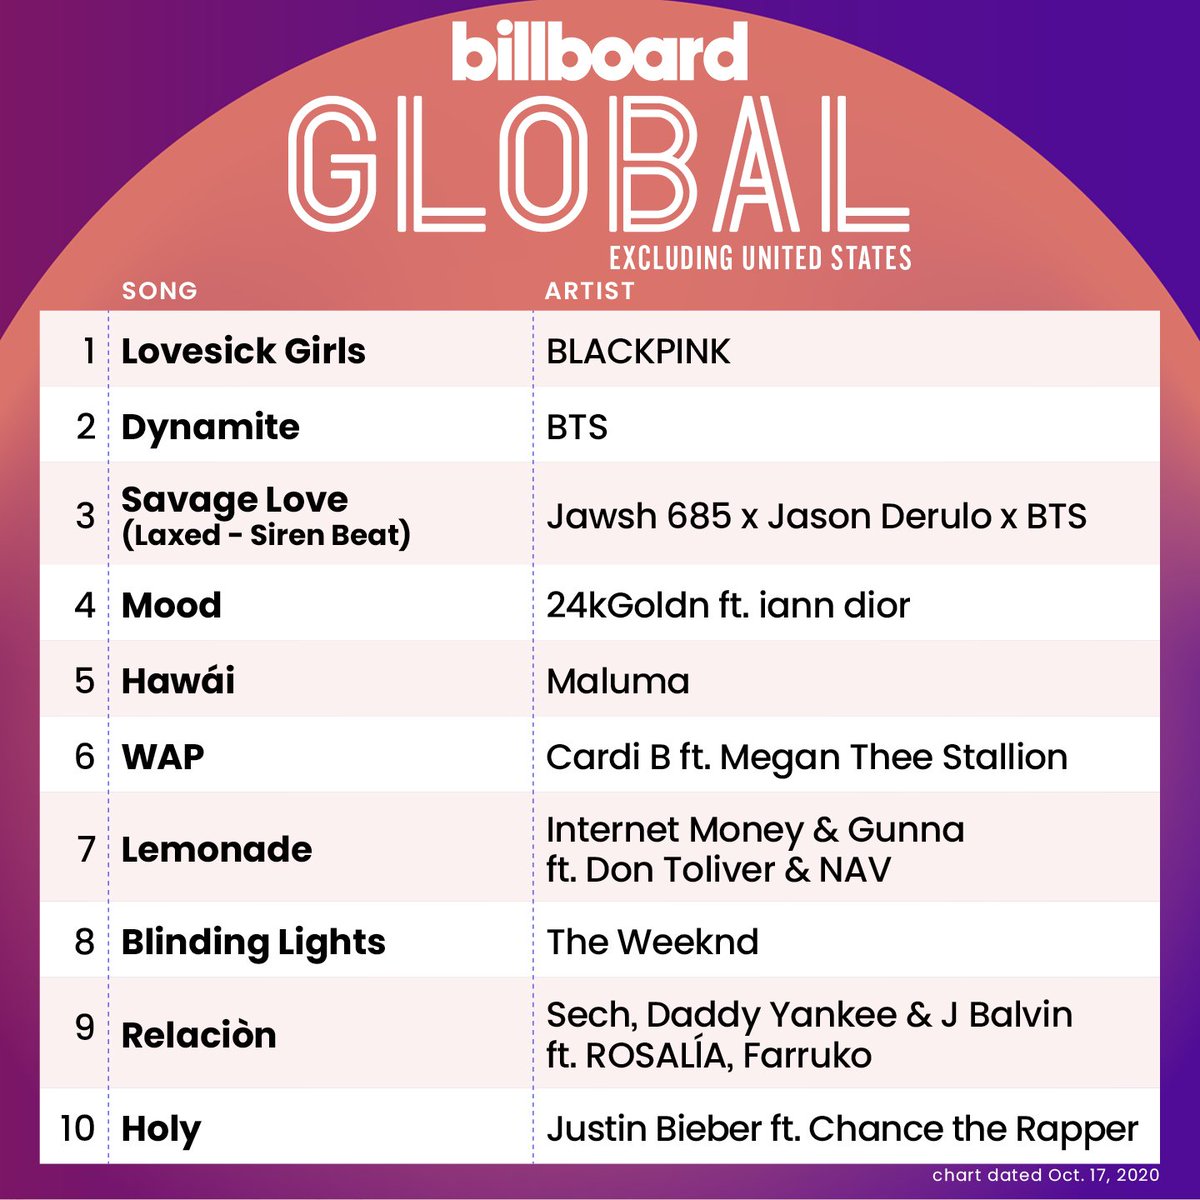 .@BLACKPINK IS NOW THE FIRST ACT TO DEBUT AT #1 ON THE BILLBOARD GLOBAL 200 EXCL US CHART I'M SO PROUD OF THESE GIRLS 😭😭